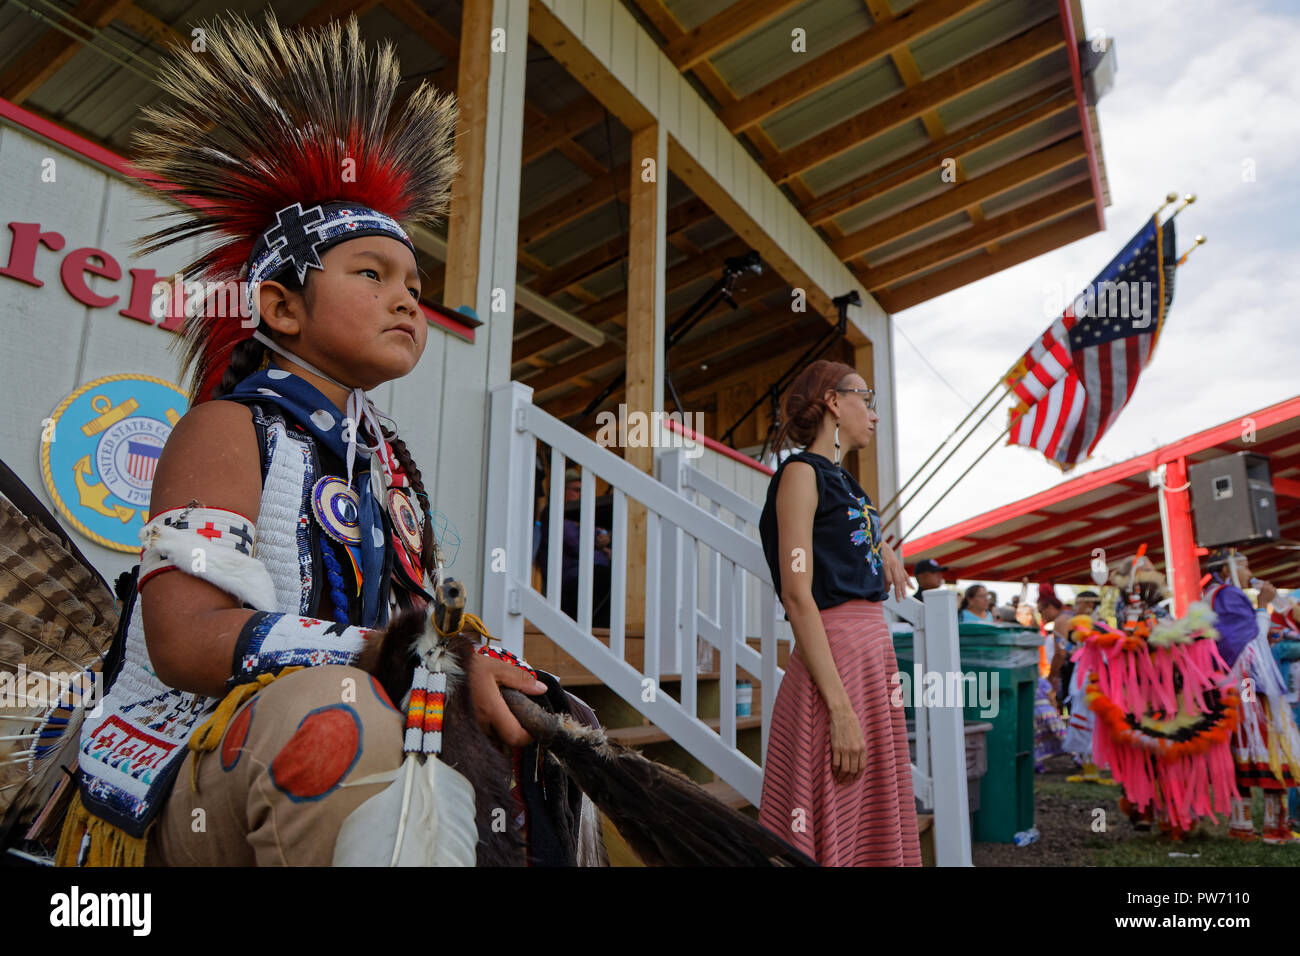 BISMARK, NORTH DAKOTA, September 8, 2018 : Sioux children at the 49th annual United Tribes Pow Wow, one large outdoor event that gathers more than 900 Stock Photo